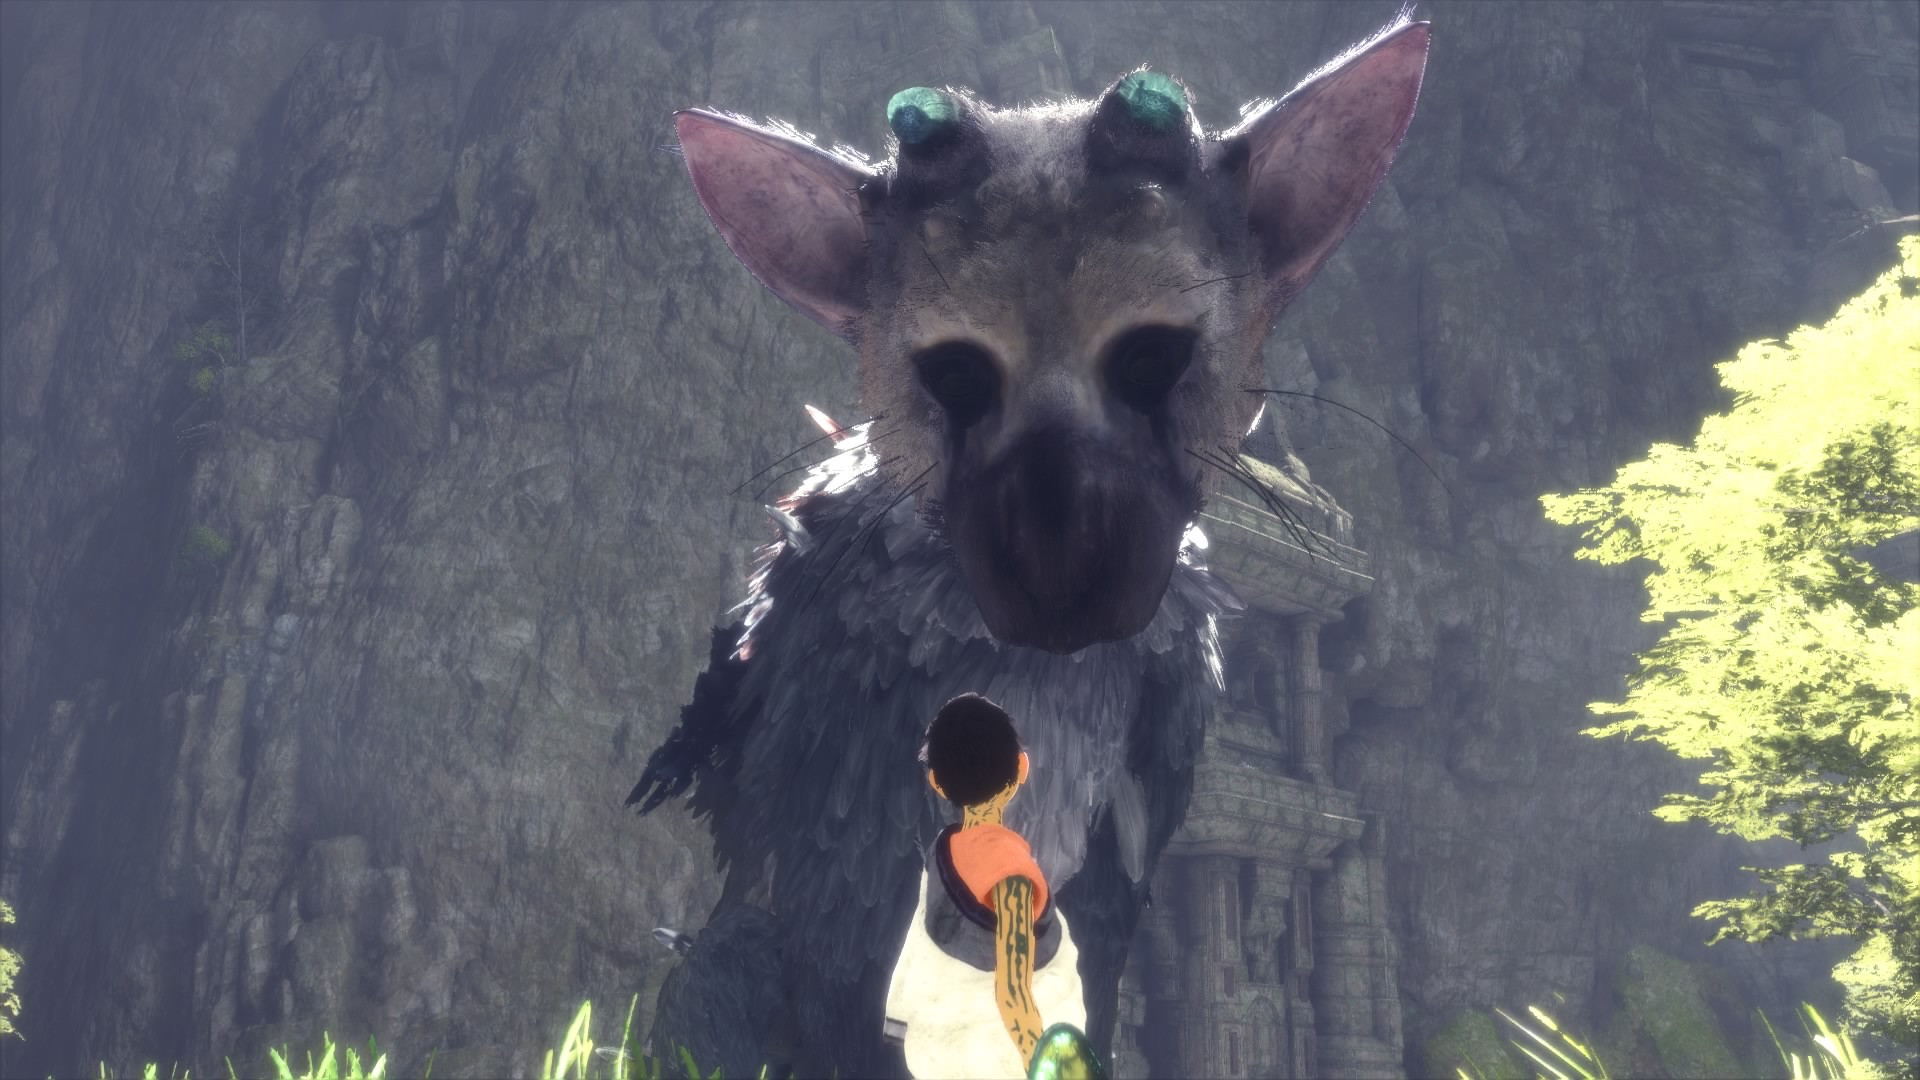  a tiny child looks up at a big grey creature that looks like a grey cat, bird-like, pinkish ears, broken blue horns, and black marks below its eyes like a clown